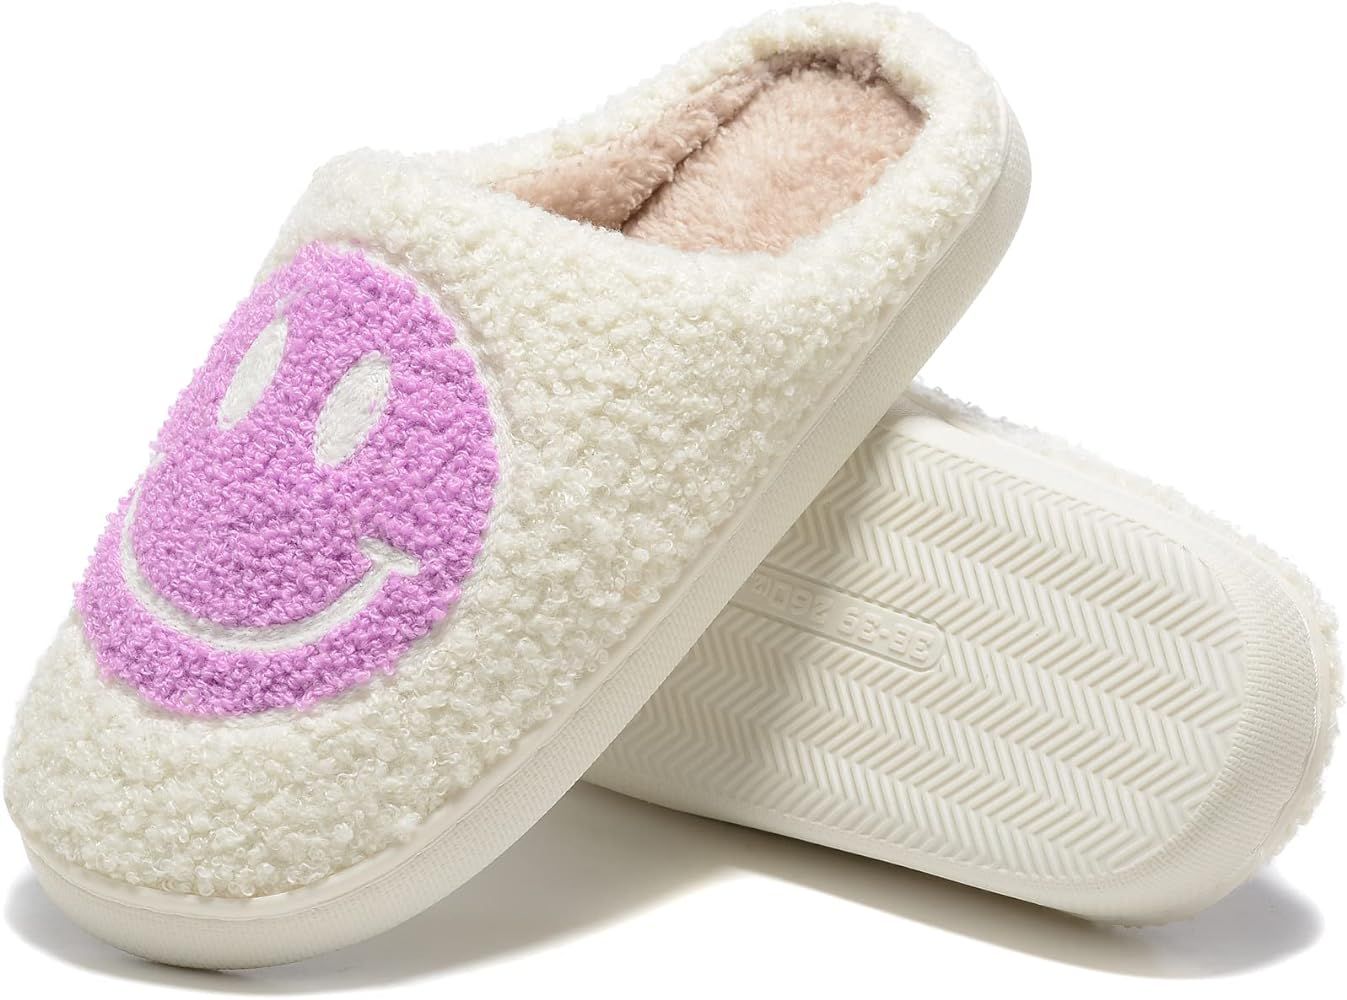 Retro Fuzzy Face Slippers for Women Men, Retro Soft Fluffy Warm Home Non-Slip Couple Style Casual Smile Face Slippers Indoor Outdoor Anti-Skid Warm Cozy Foam Slide Fuzzy Slides with Soft Memory Foam Shoes | Amazon (US)